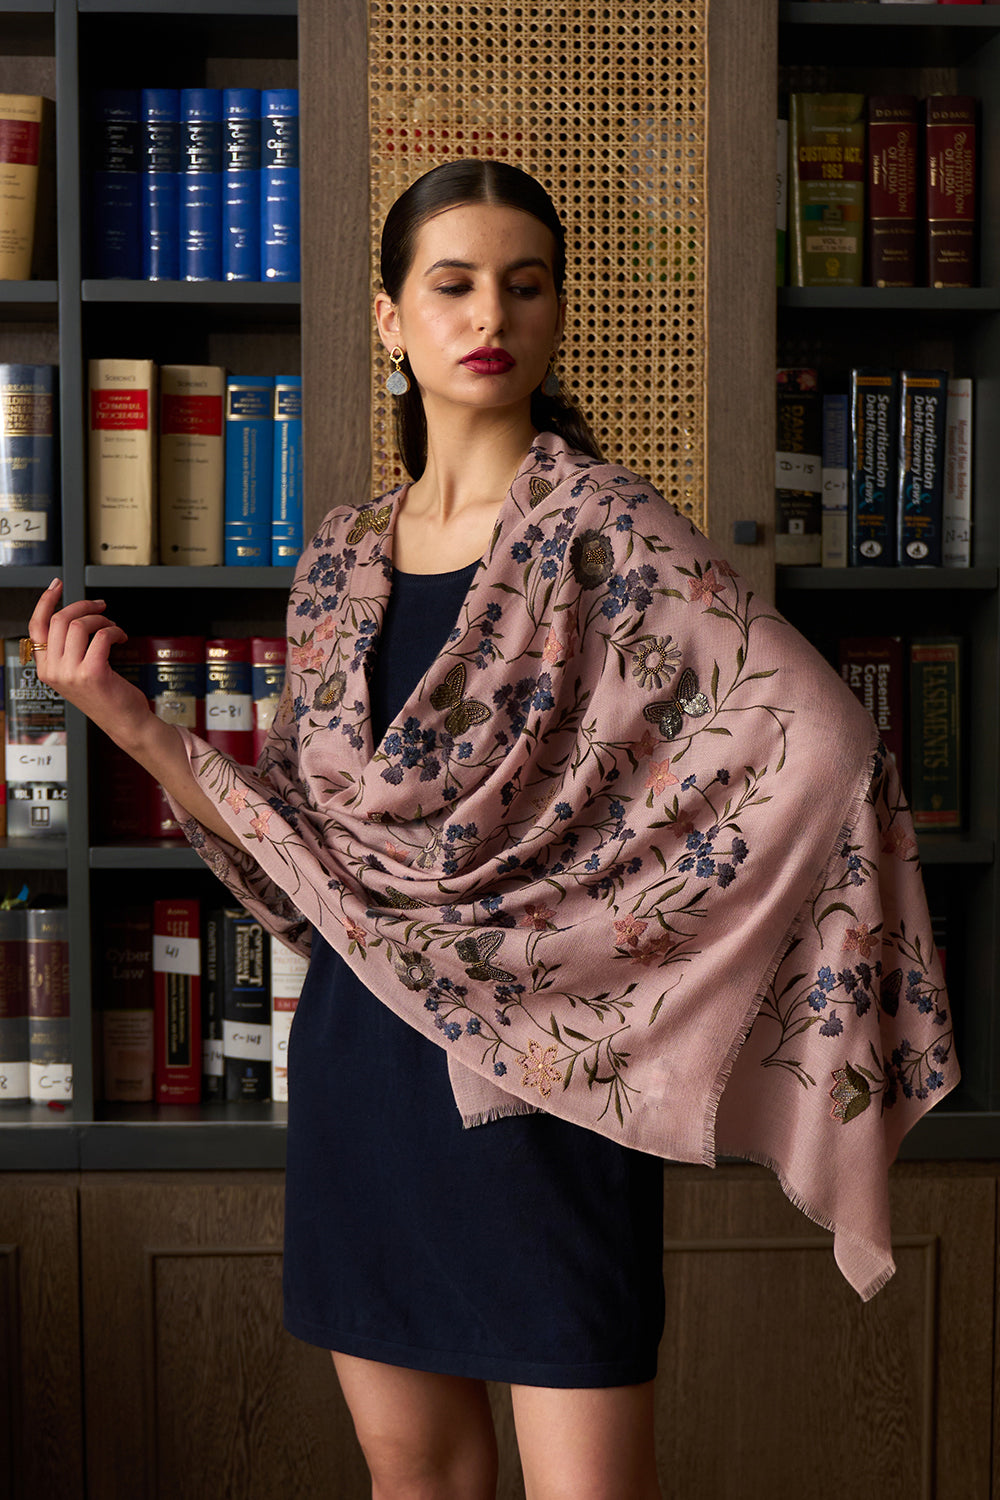 Tender Bloom | Embroidered Pure Cashmere Stole